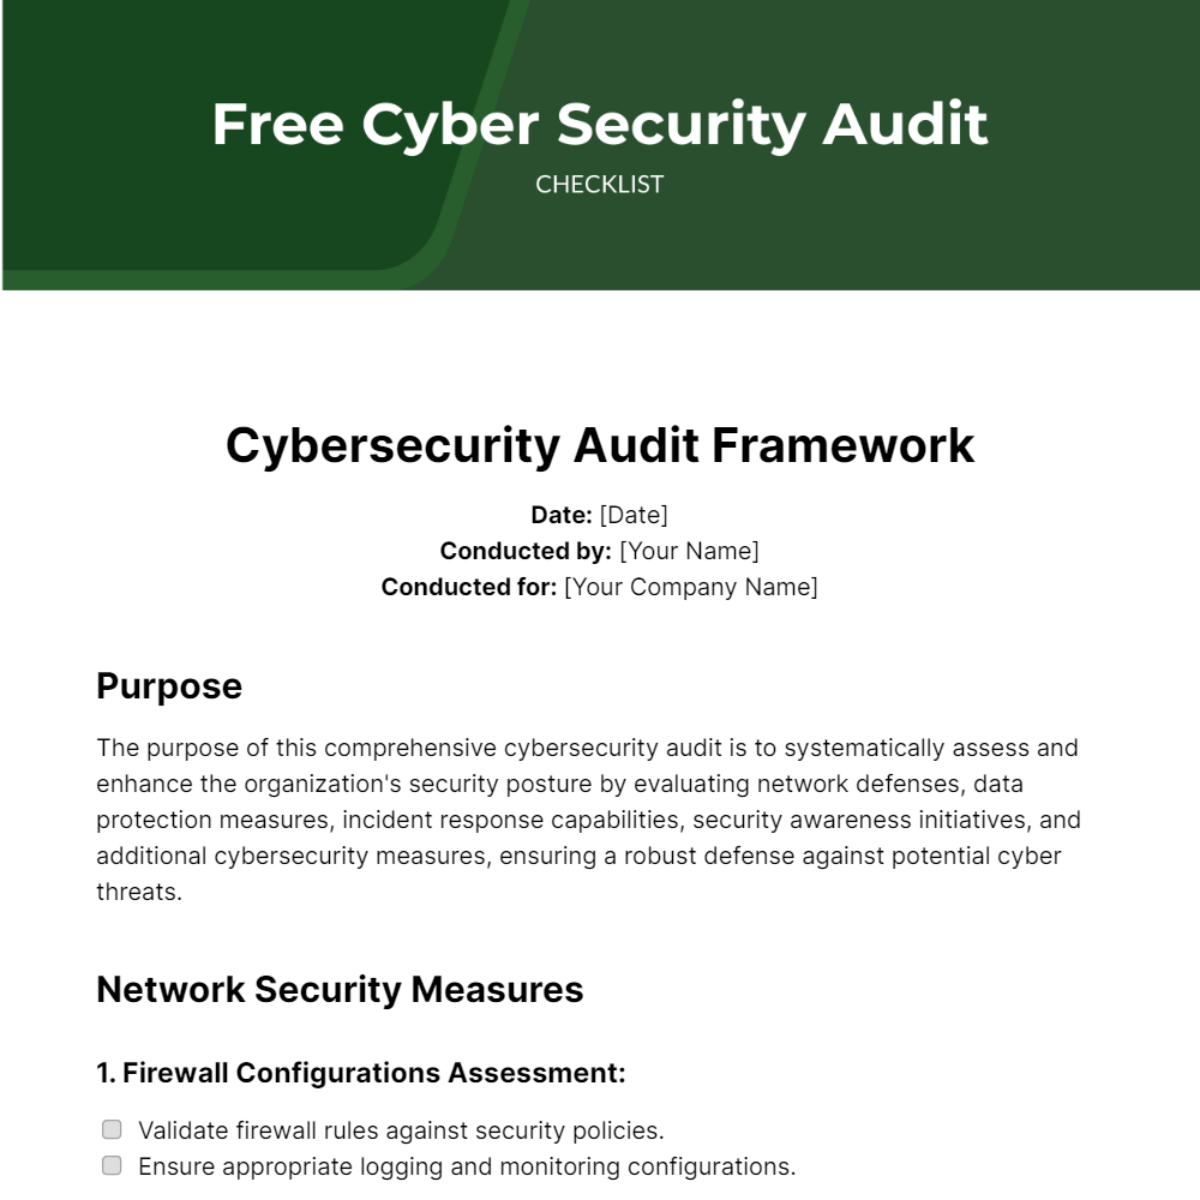 Free Cyber Security Audit Checklist Template